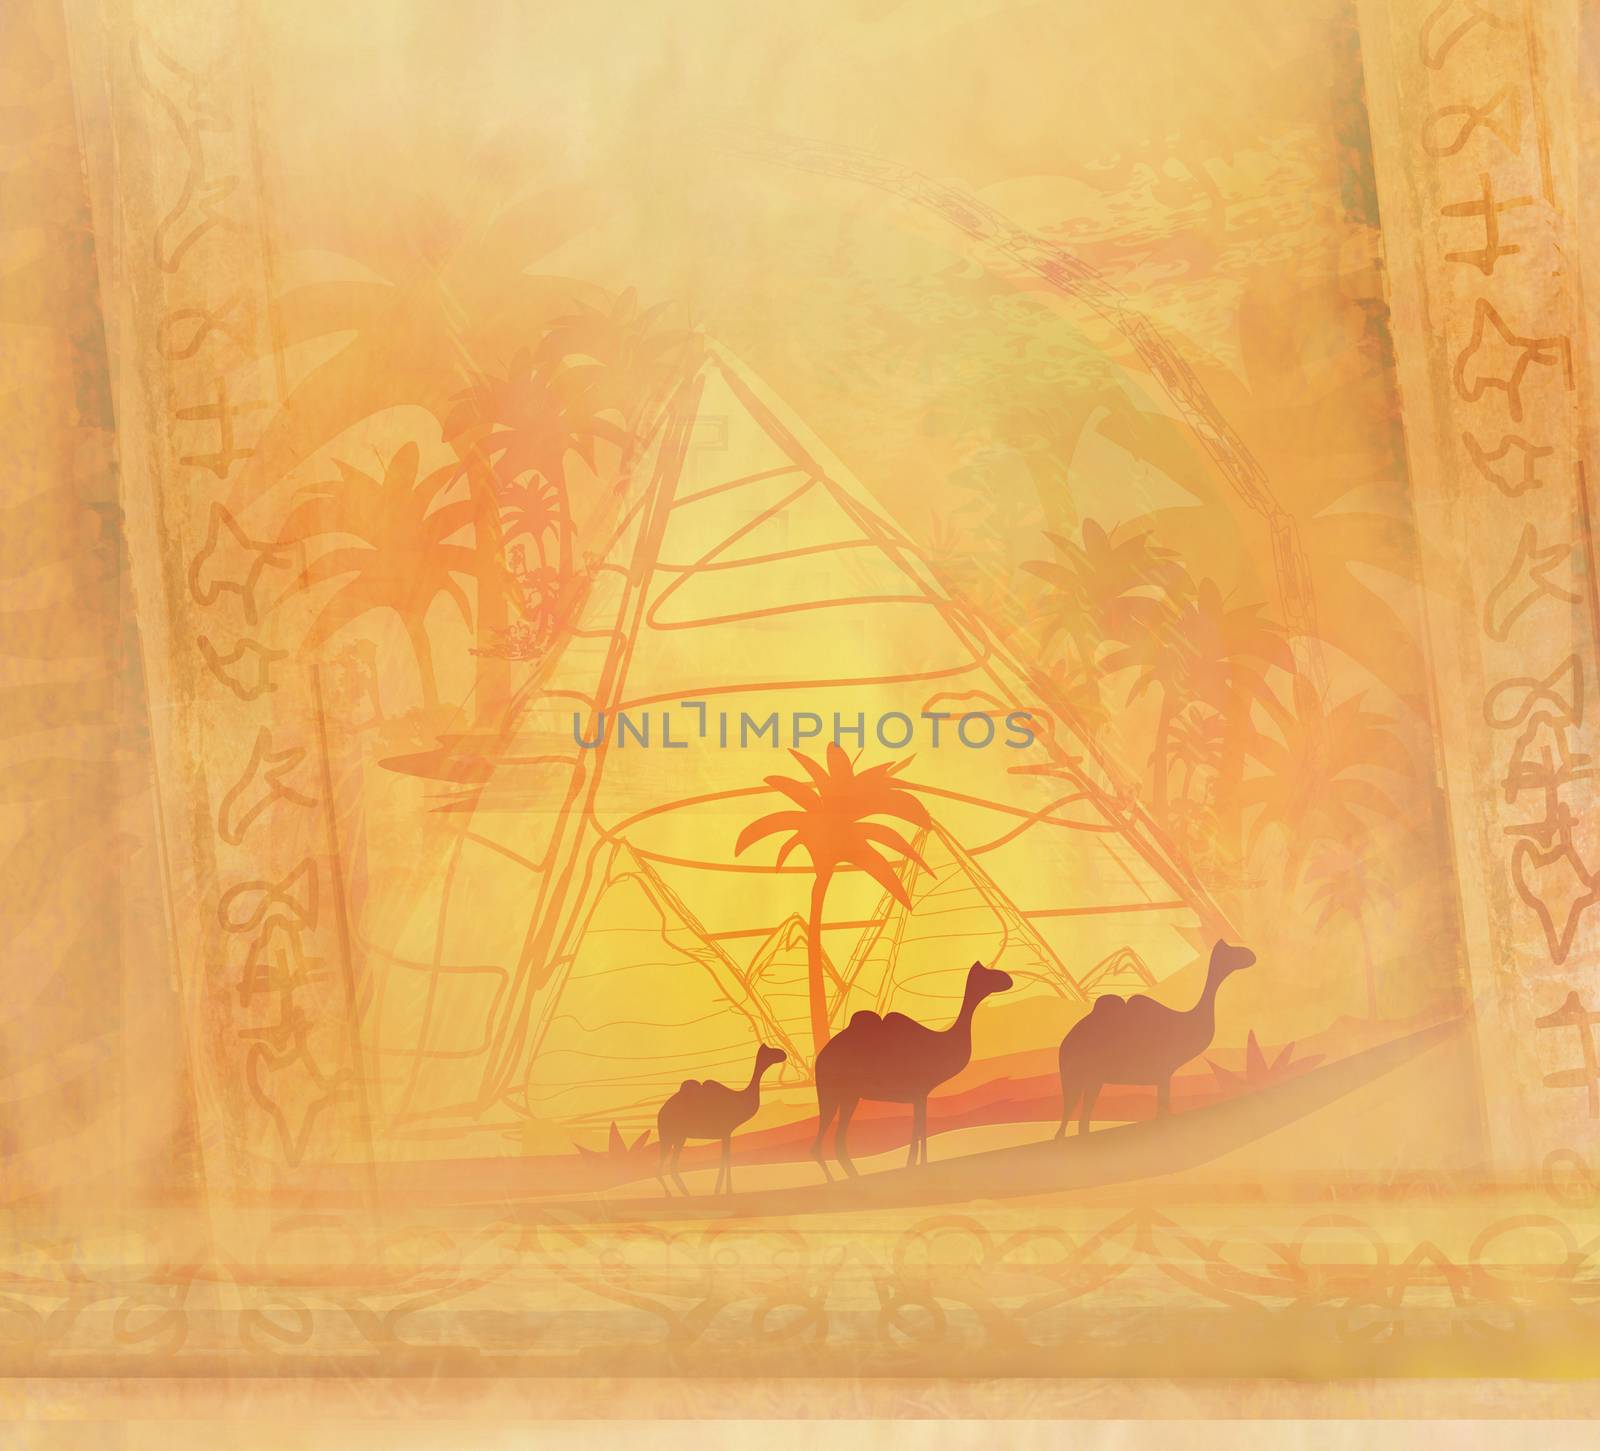 Vintage background with pyramids and camels by JackyBrown